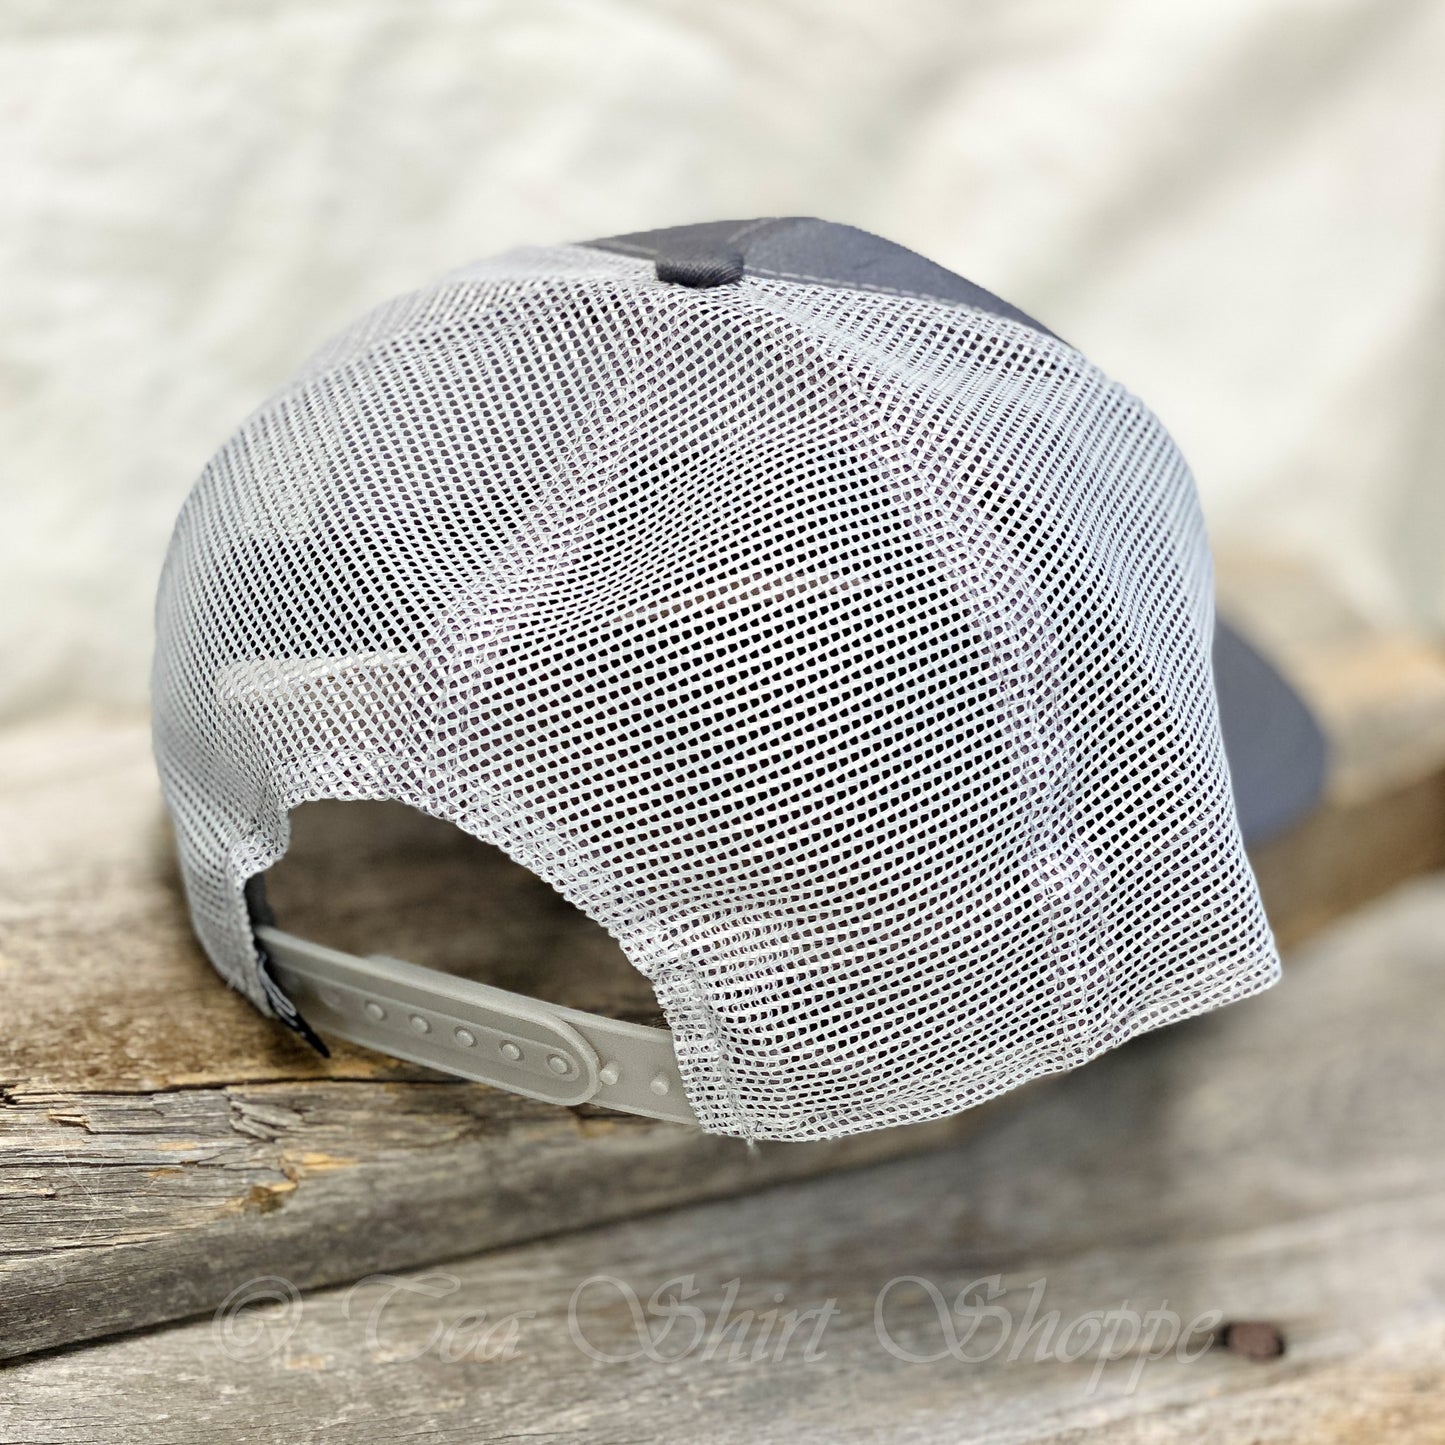 The nylon mesh back of the cap provides ventilation to keep you cool and comfortable even on hot and humid days. Its structured, six-panel design and low-profile shape give it a sleek and sophisticated look that will complement any casual or formal outfit.